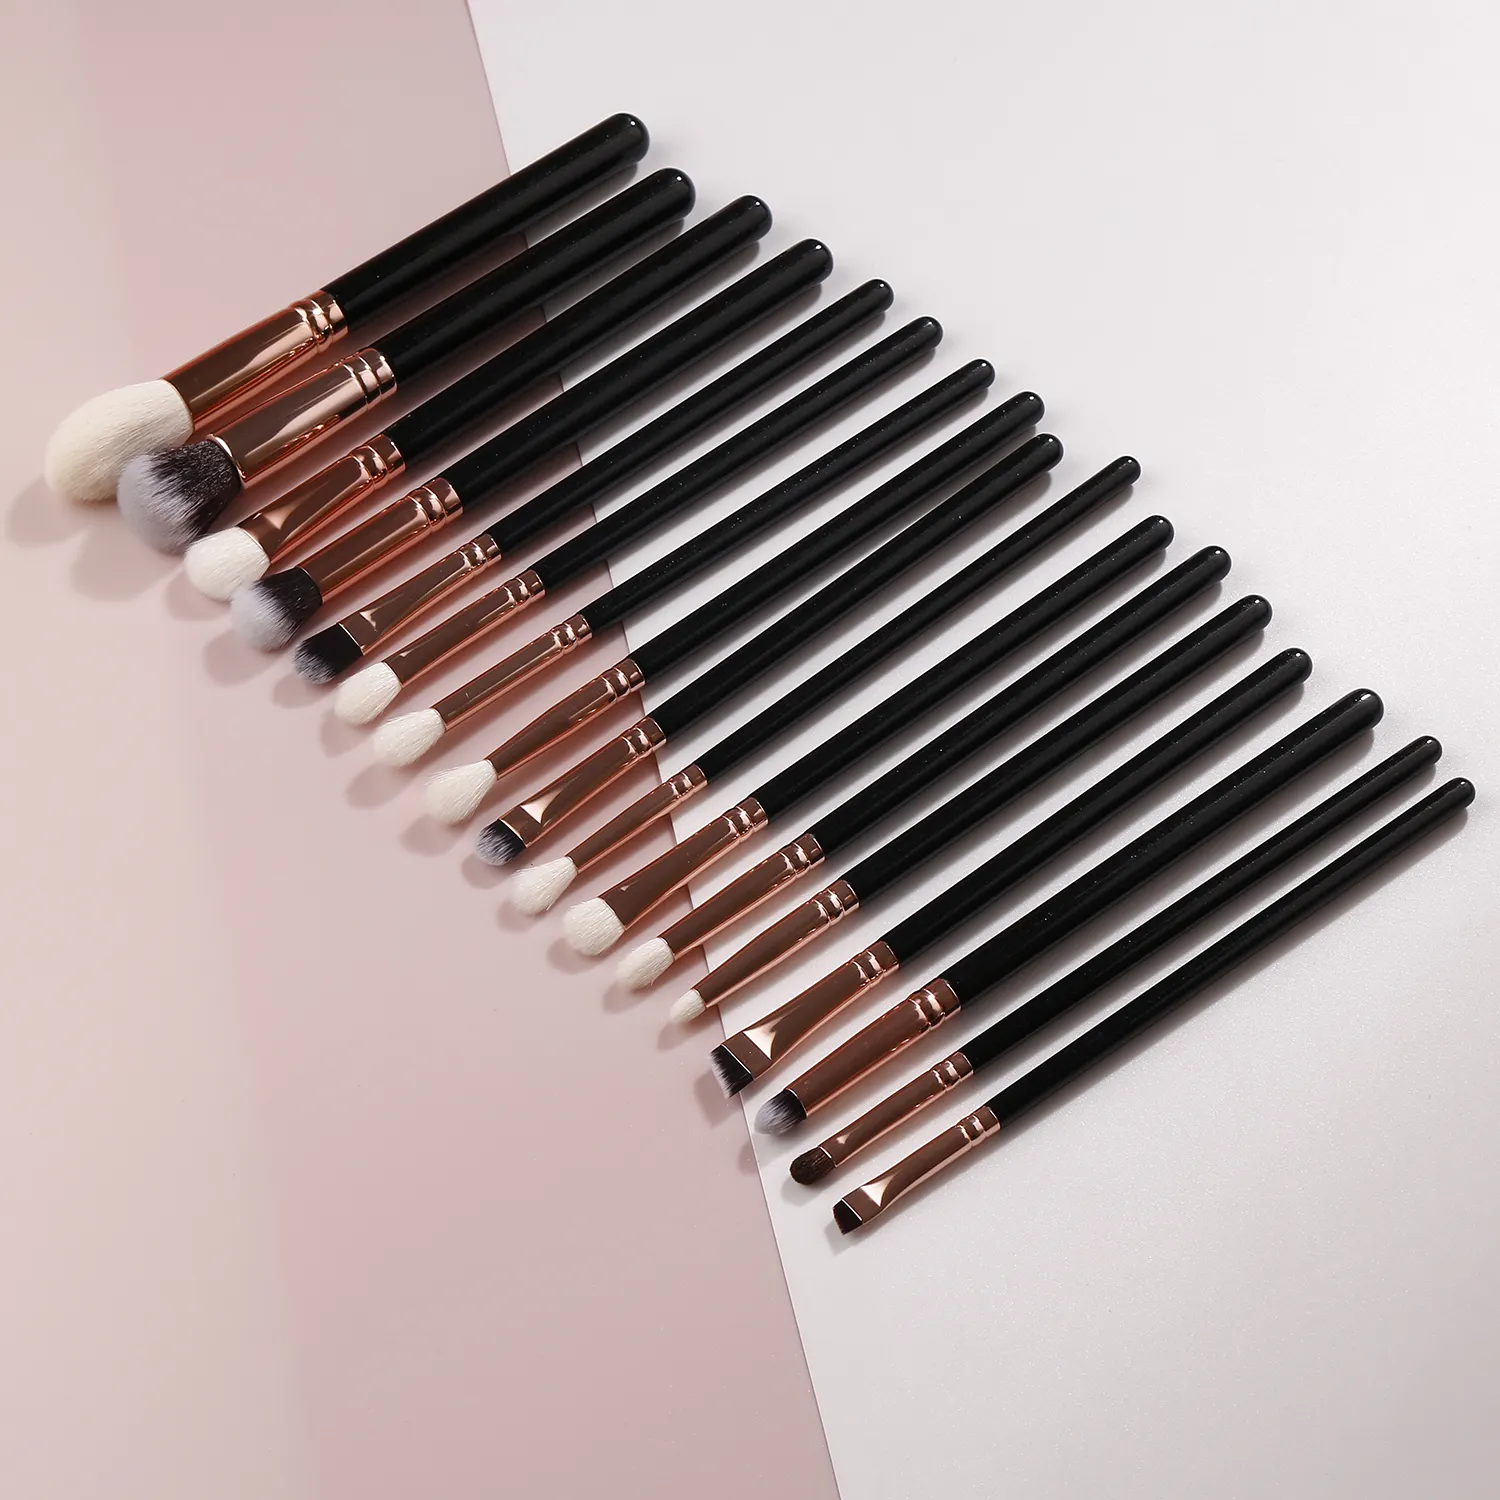 25pcs natural hair Makeup tools accept customize logo private label all over shade brush